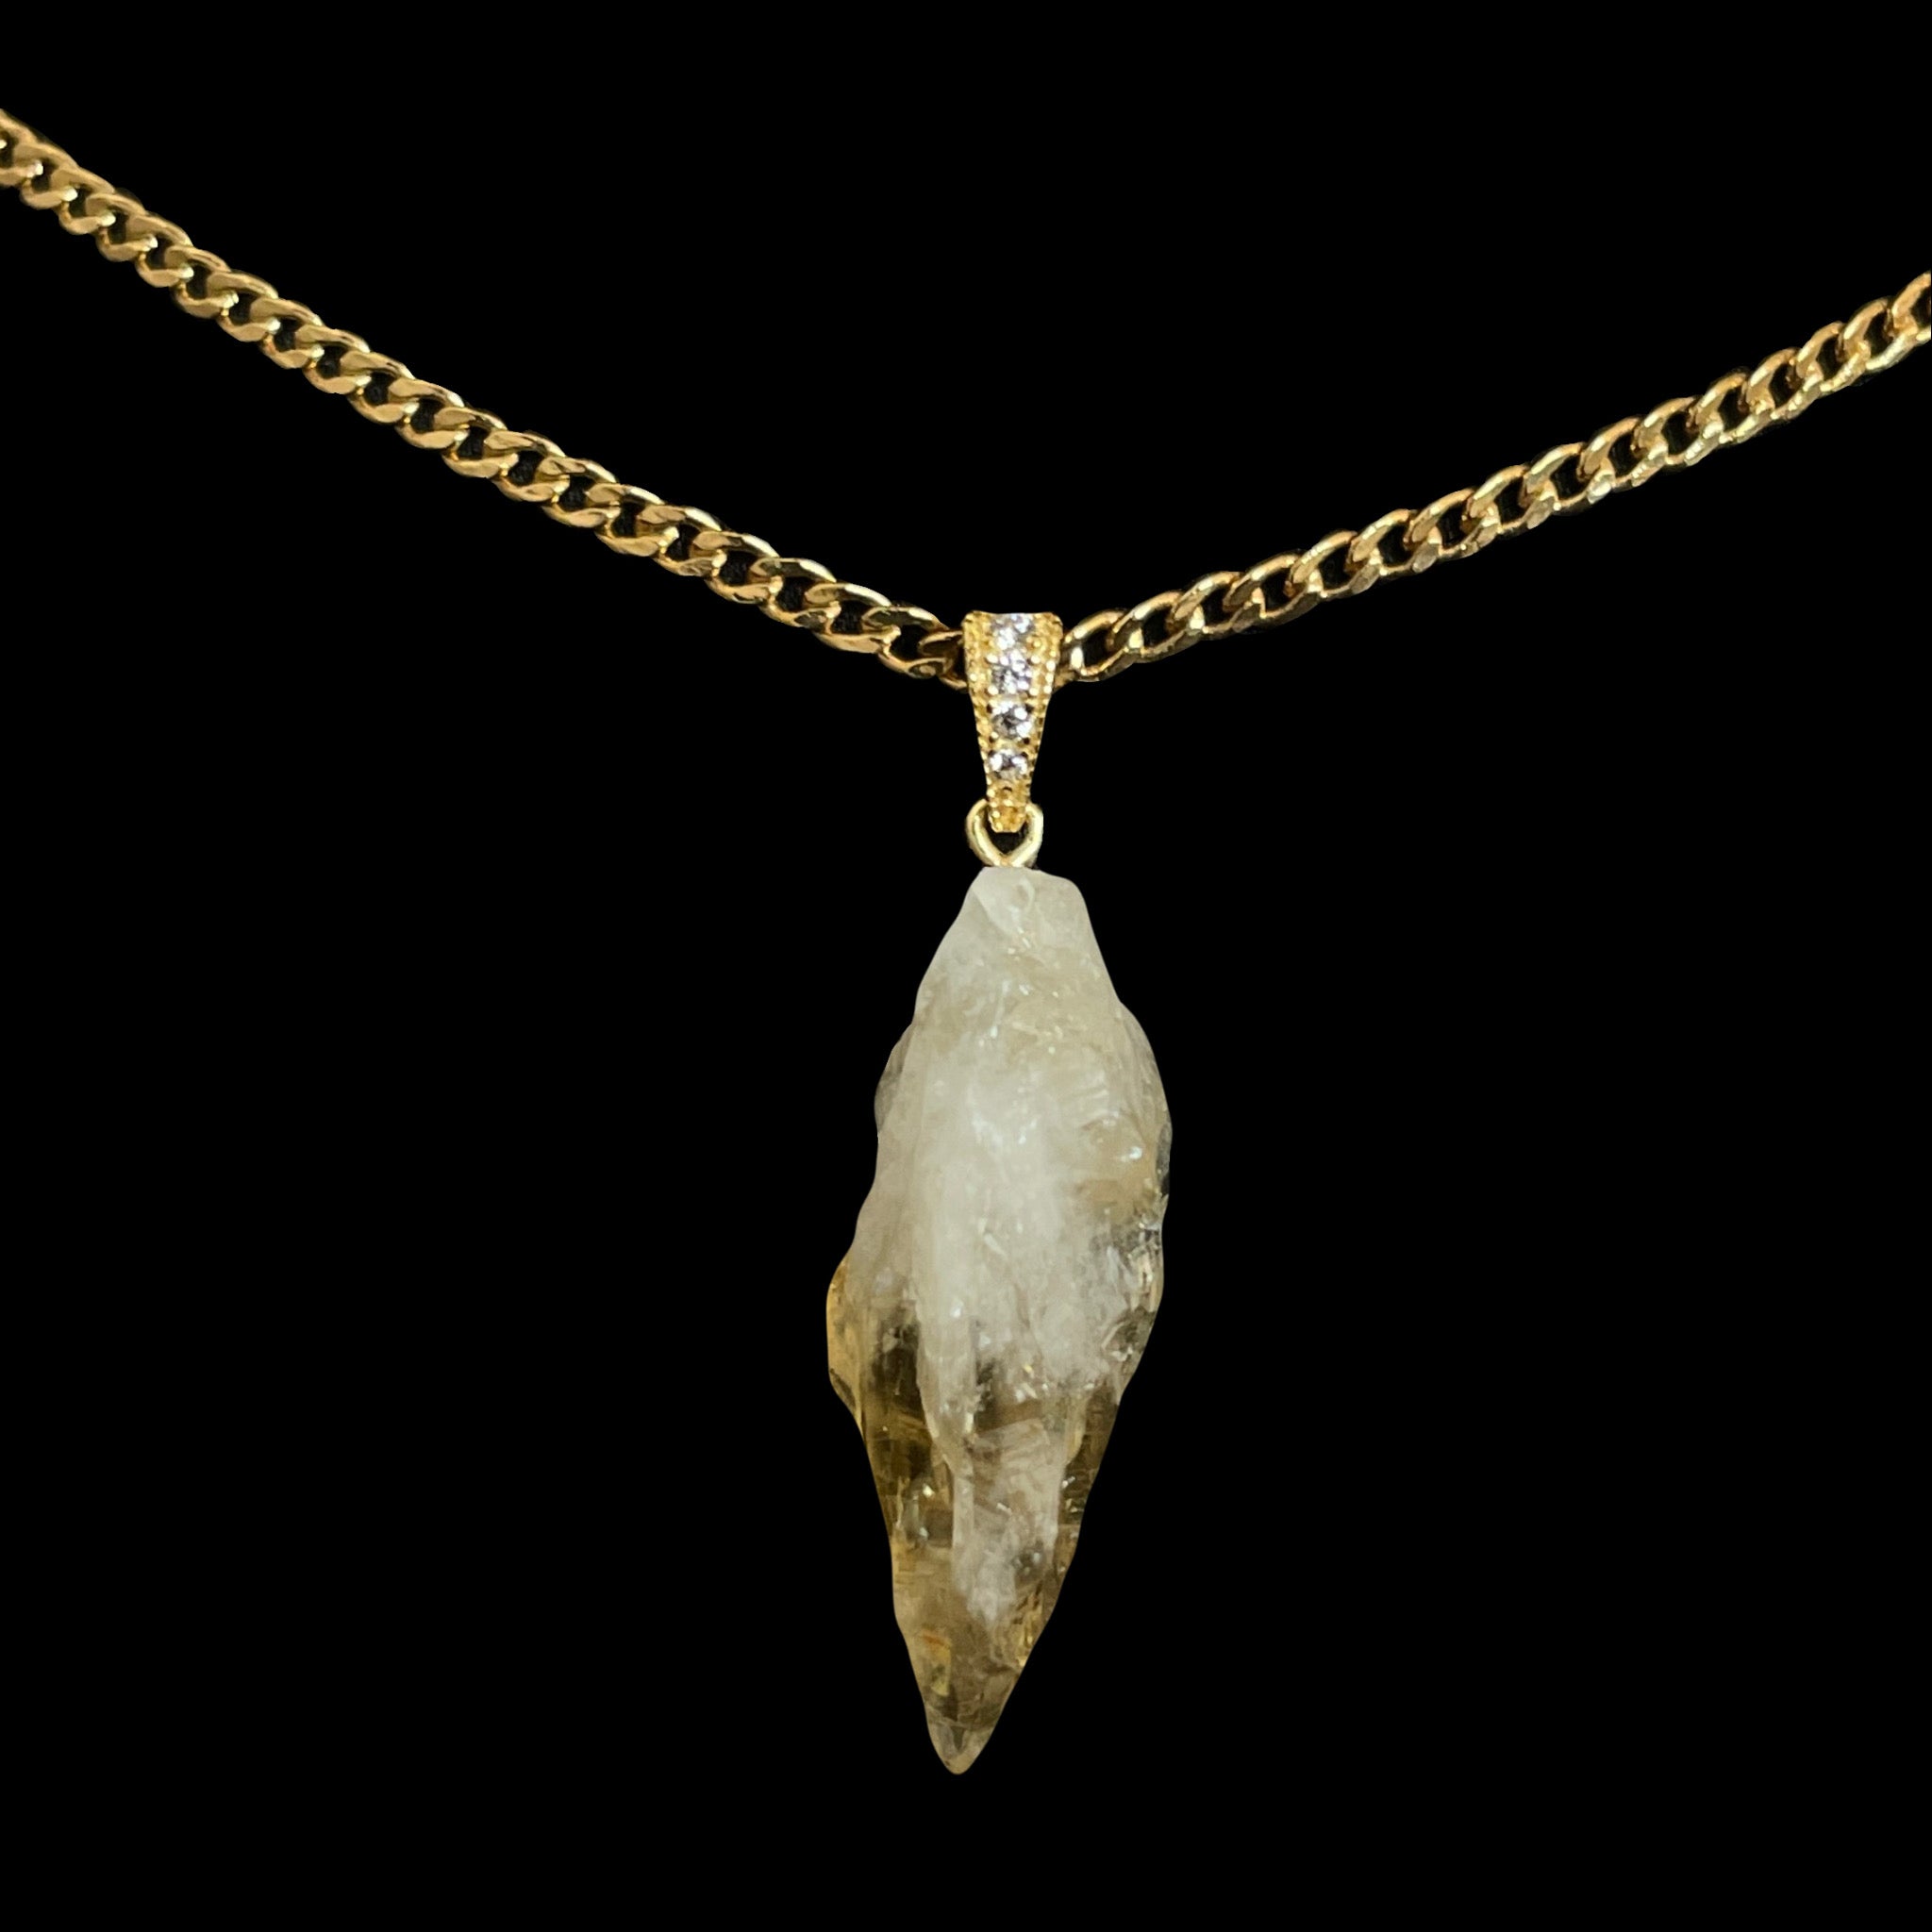 Citrine, 18k Gold Filled, Cuban Chain Necklace